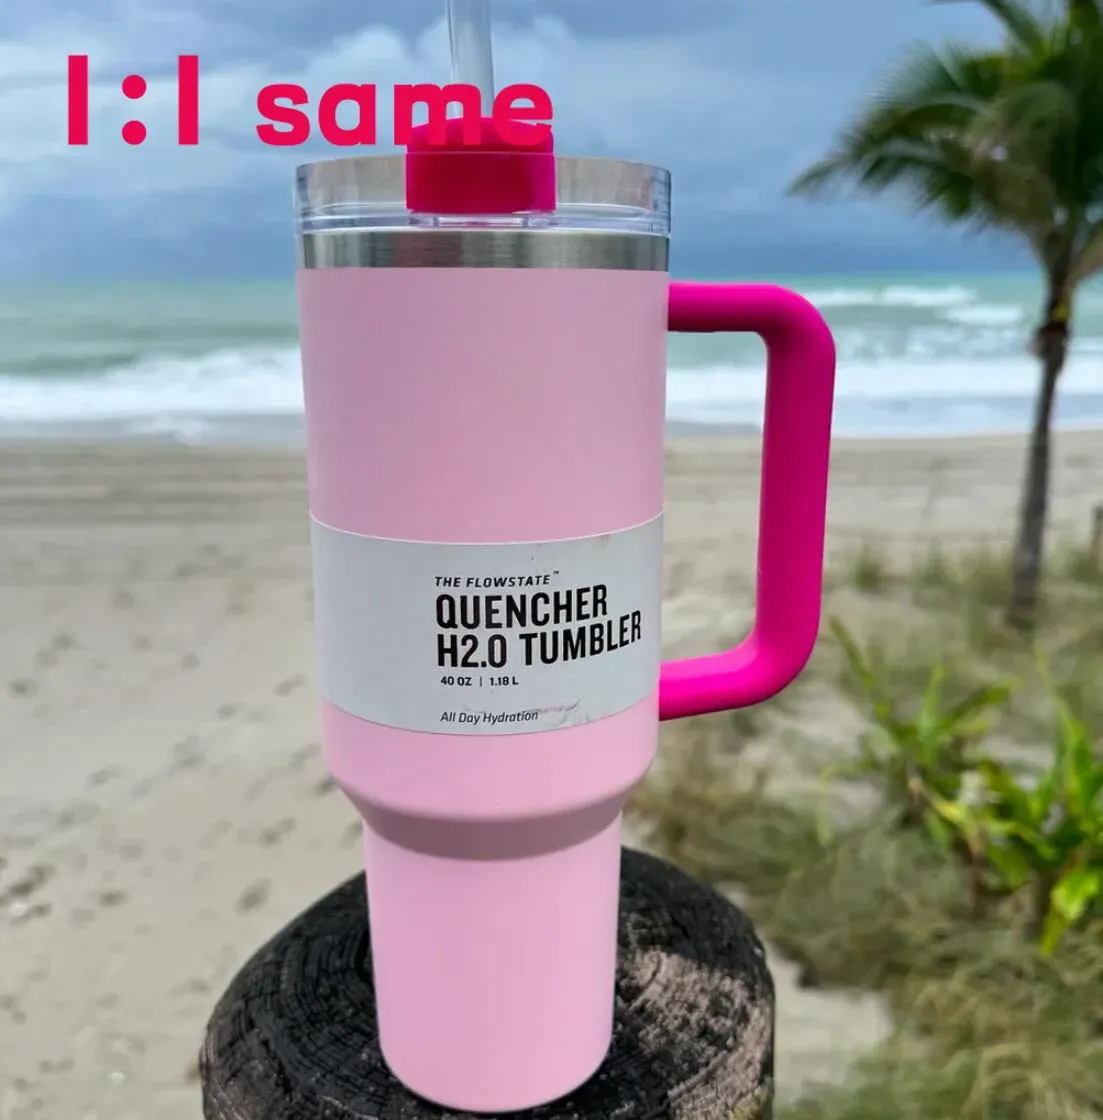 US stock PINK Flamingo 40oz Quencher H2.0 Coffee Mugs Cups camping travel Car cup Stainless Steel Tumblers Cups Silicone handle Valentine Day Gift 1:1 Same Logo